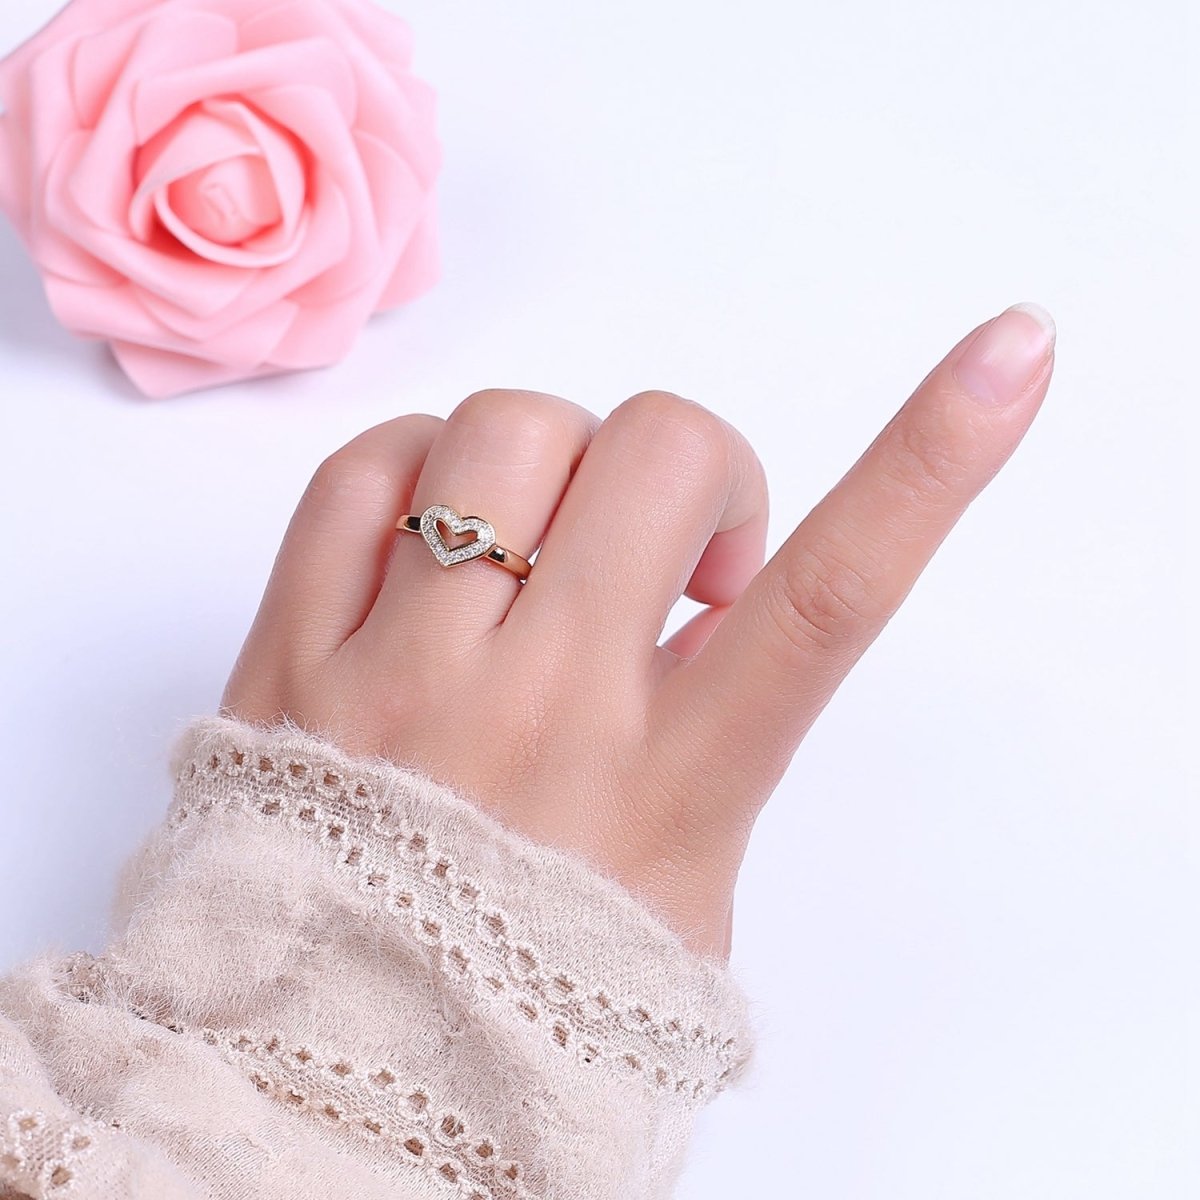 Dainty Heart Ring Mini Gold Filled Heart Ring Stackable Jewelry Rings Open Adjustable O2031 - DLUXCA